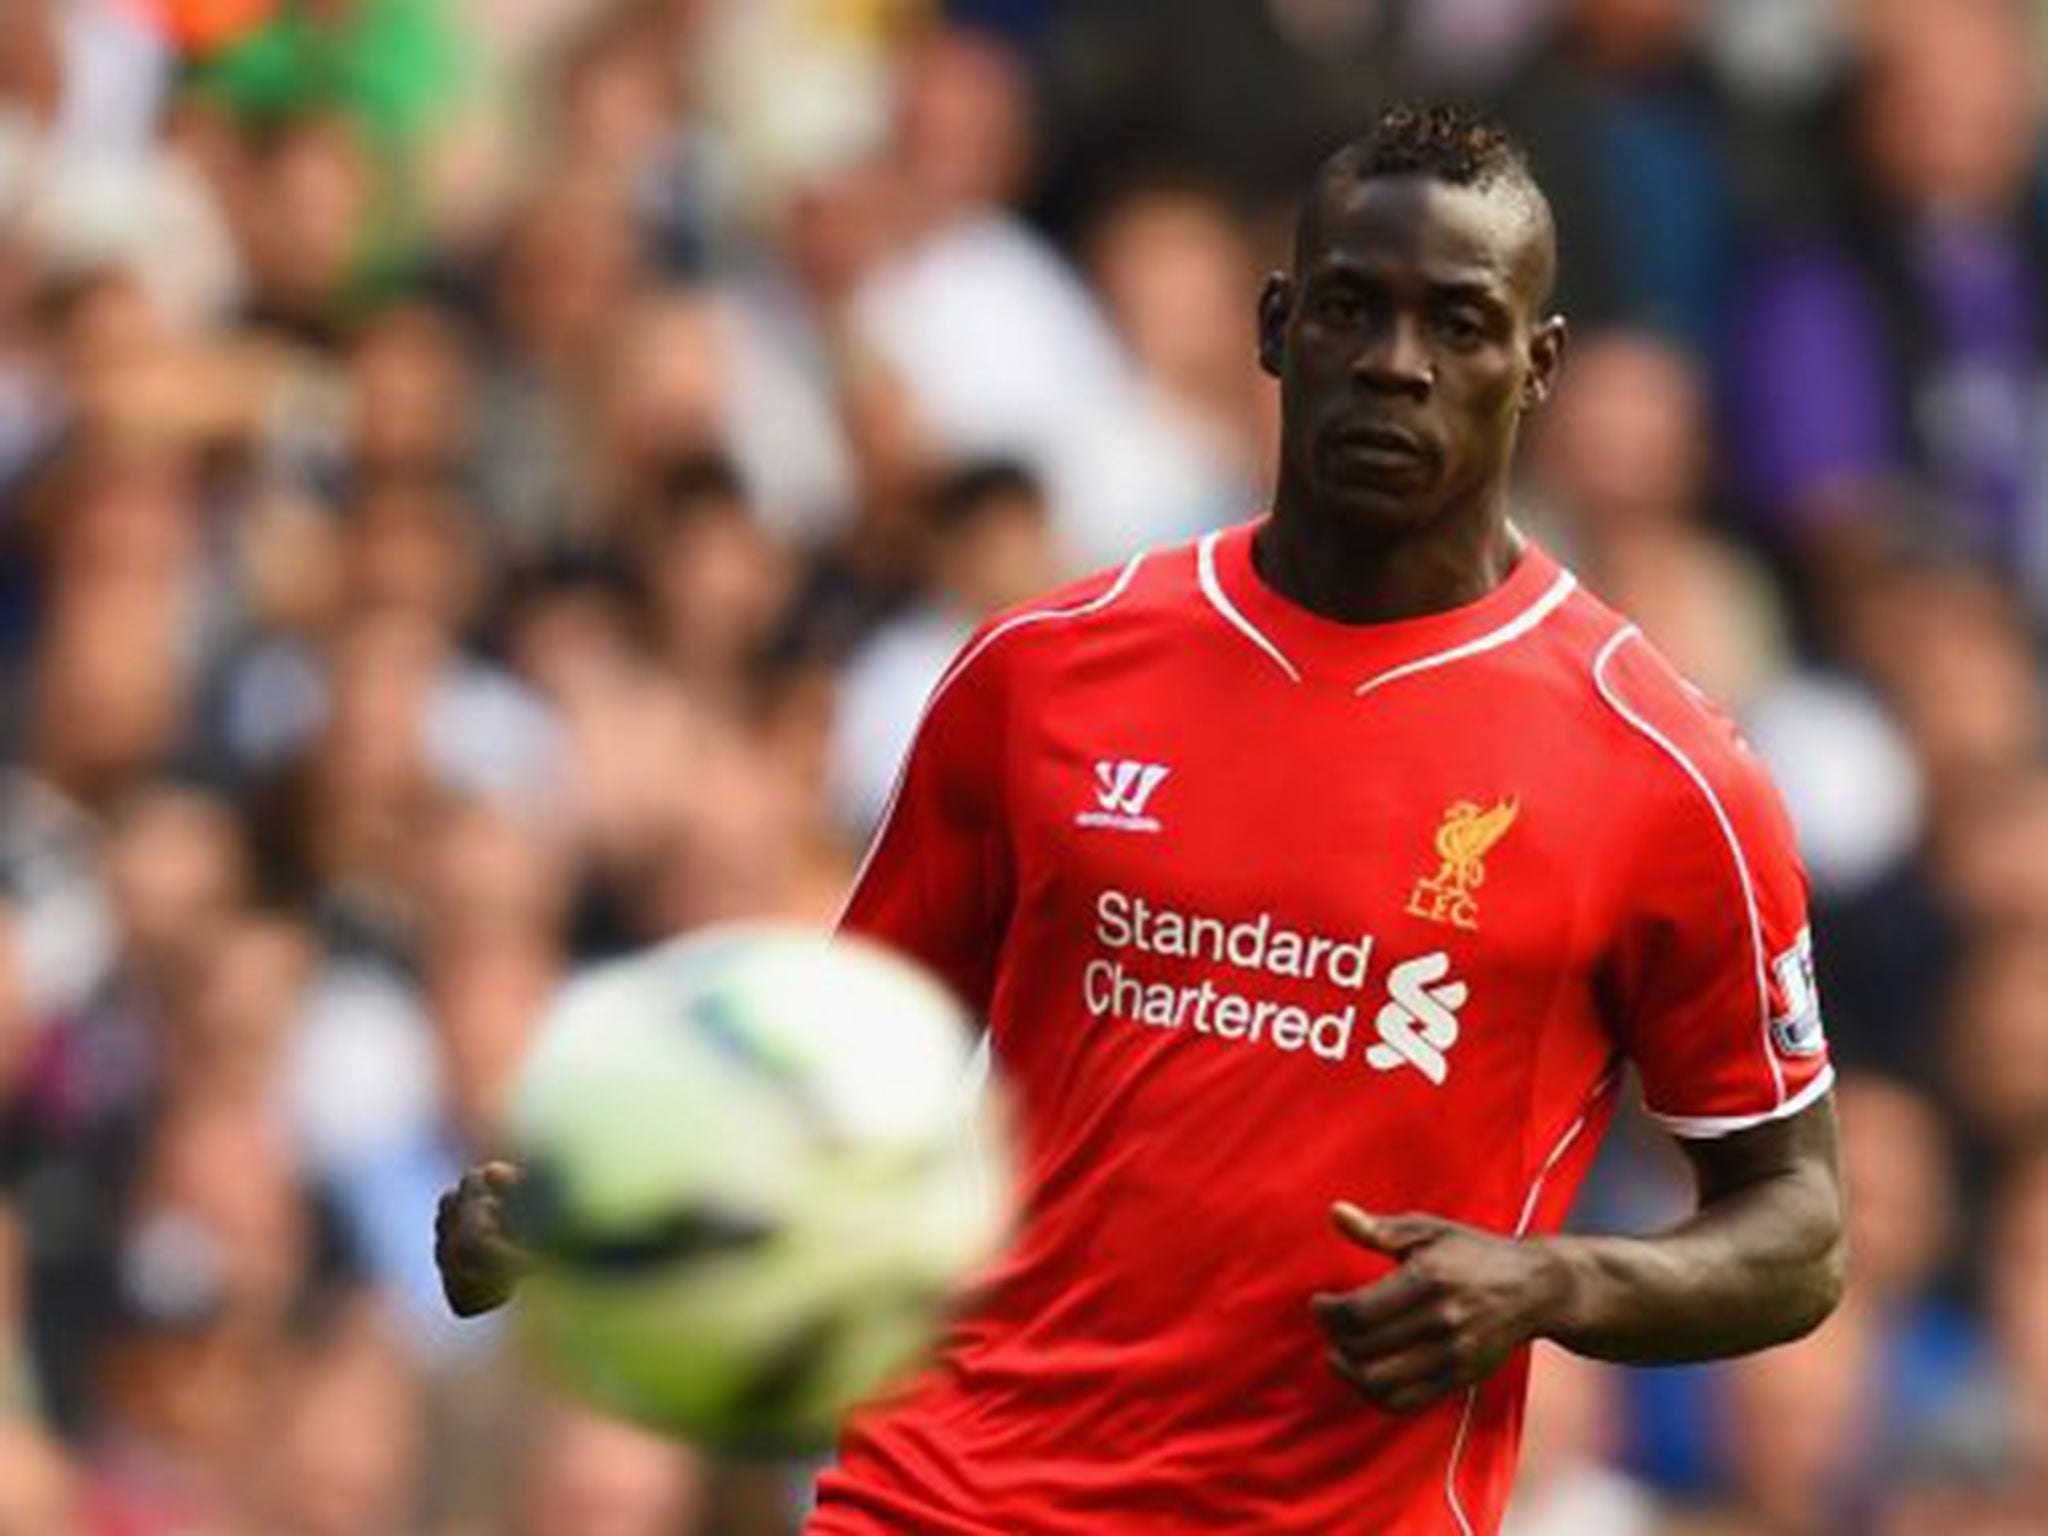 Mario Balotelli in action during his Liverpool debut against Tottenham